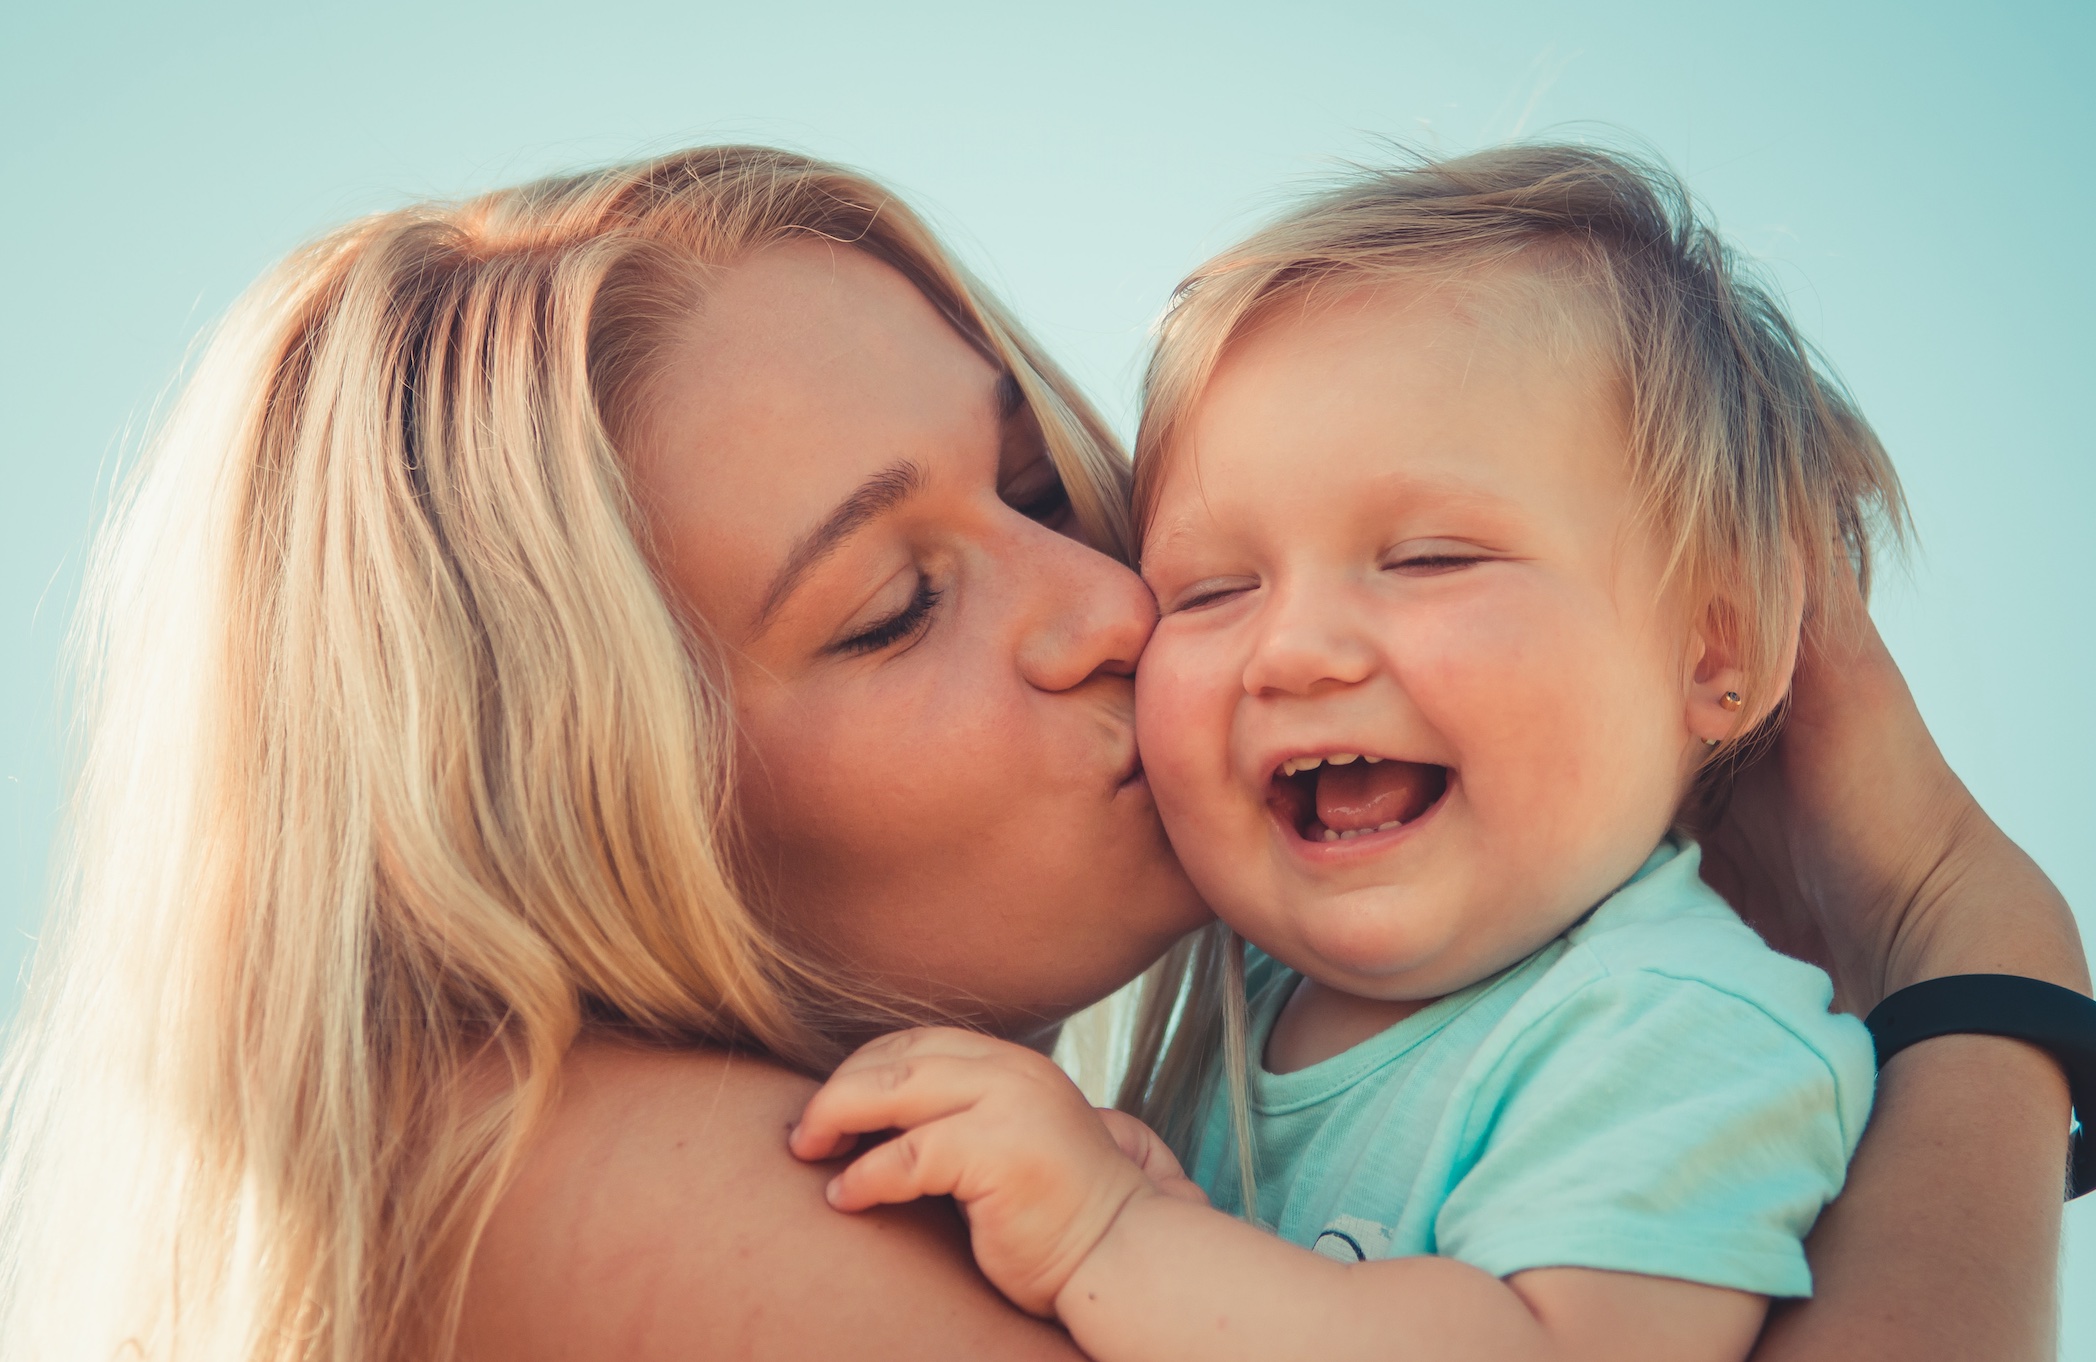 Blonde woman holding blonde girl and kissing her on the cheek; image by Andriyko Podilnyk, via Unsplash.com.